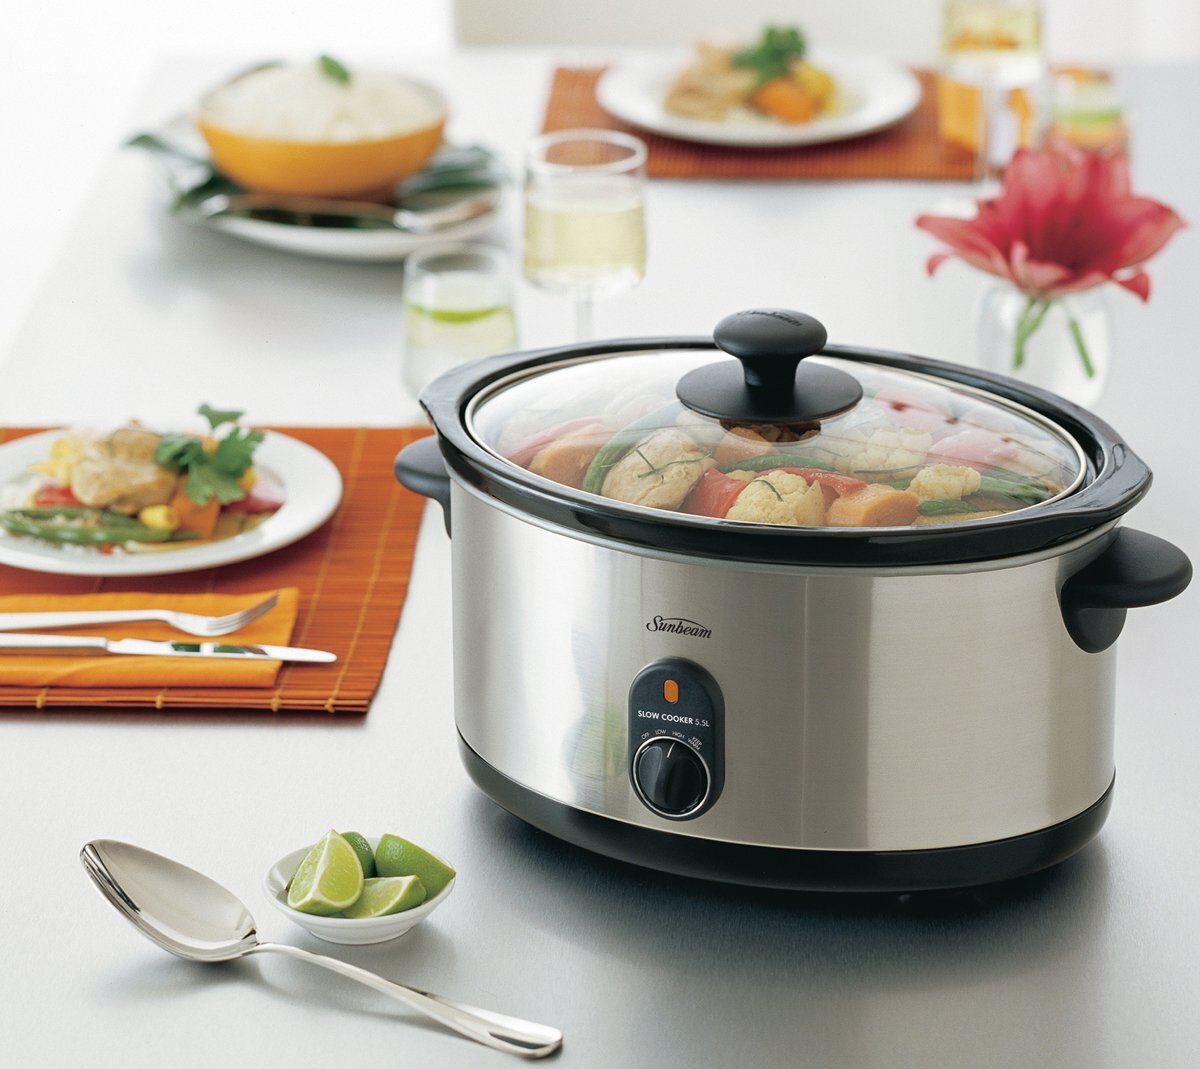 Sunbeam Slow Cooker 5.5L Stainless Steel - HP5520